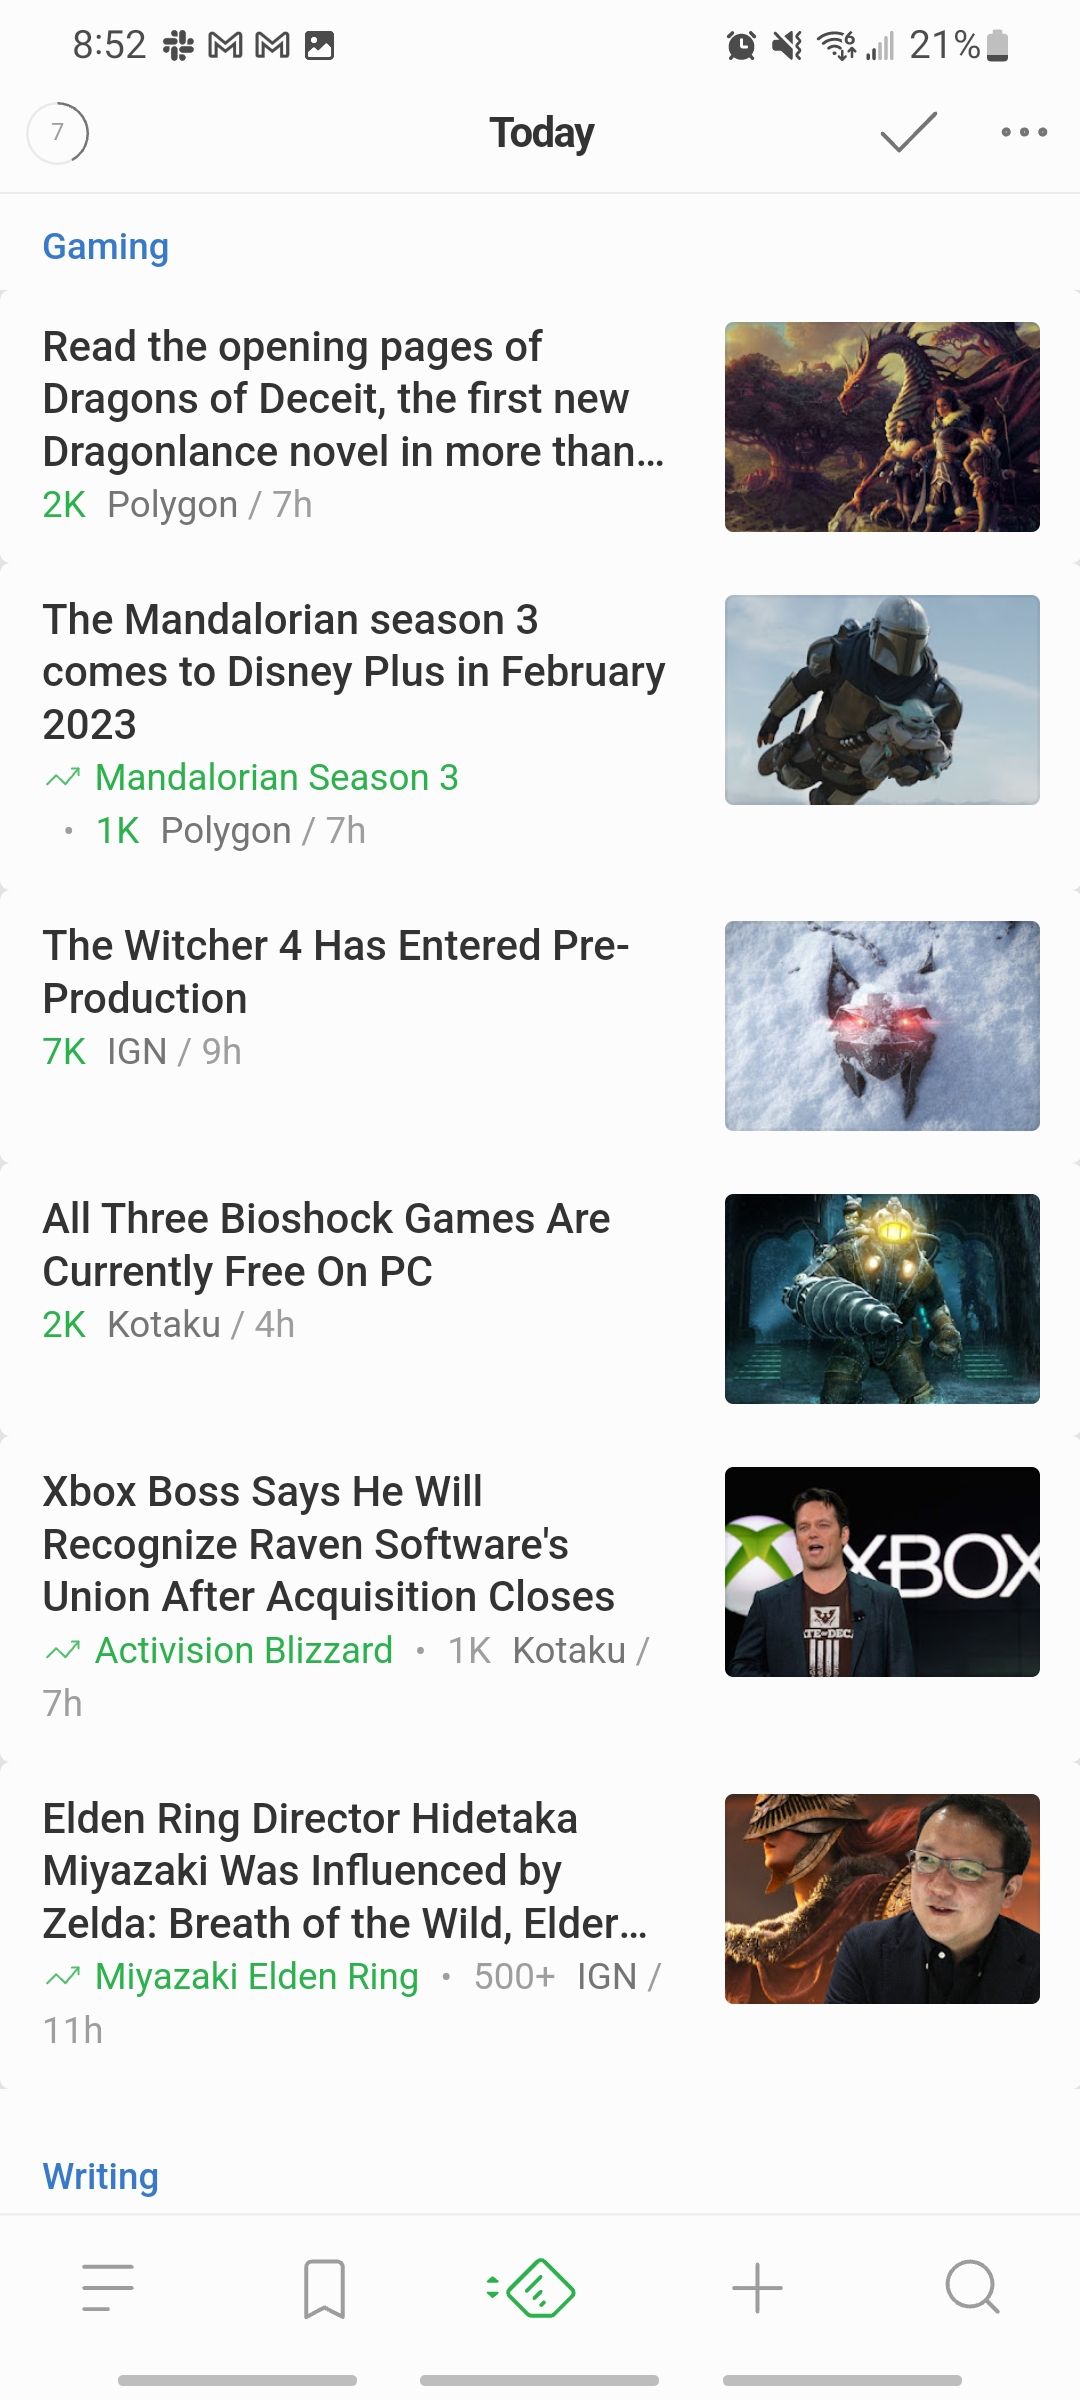 feedly app current day's feed for gaming section